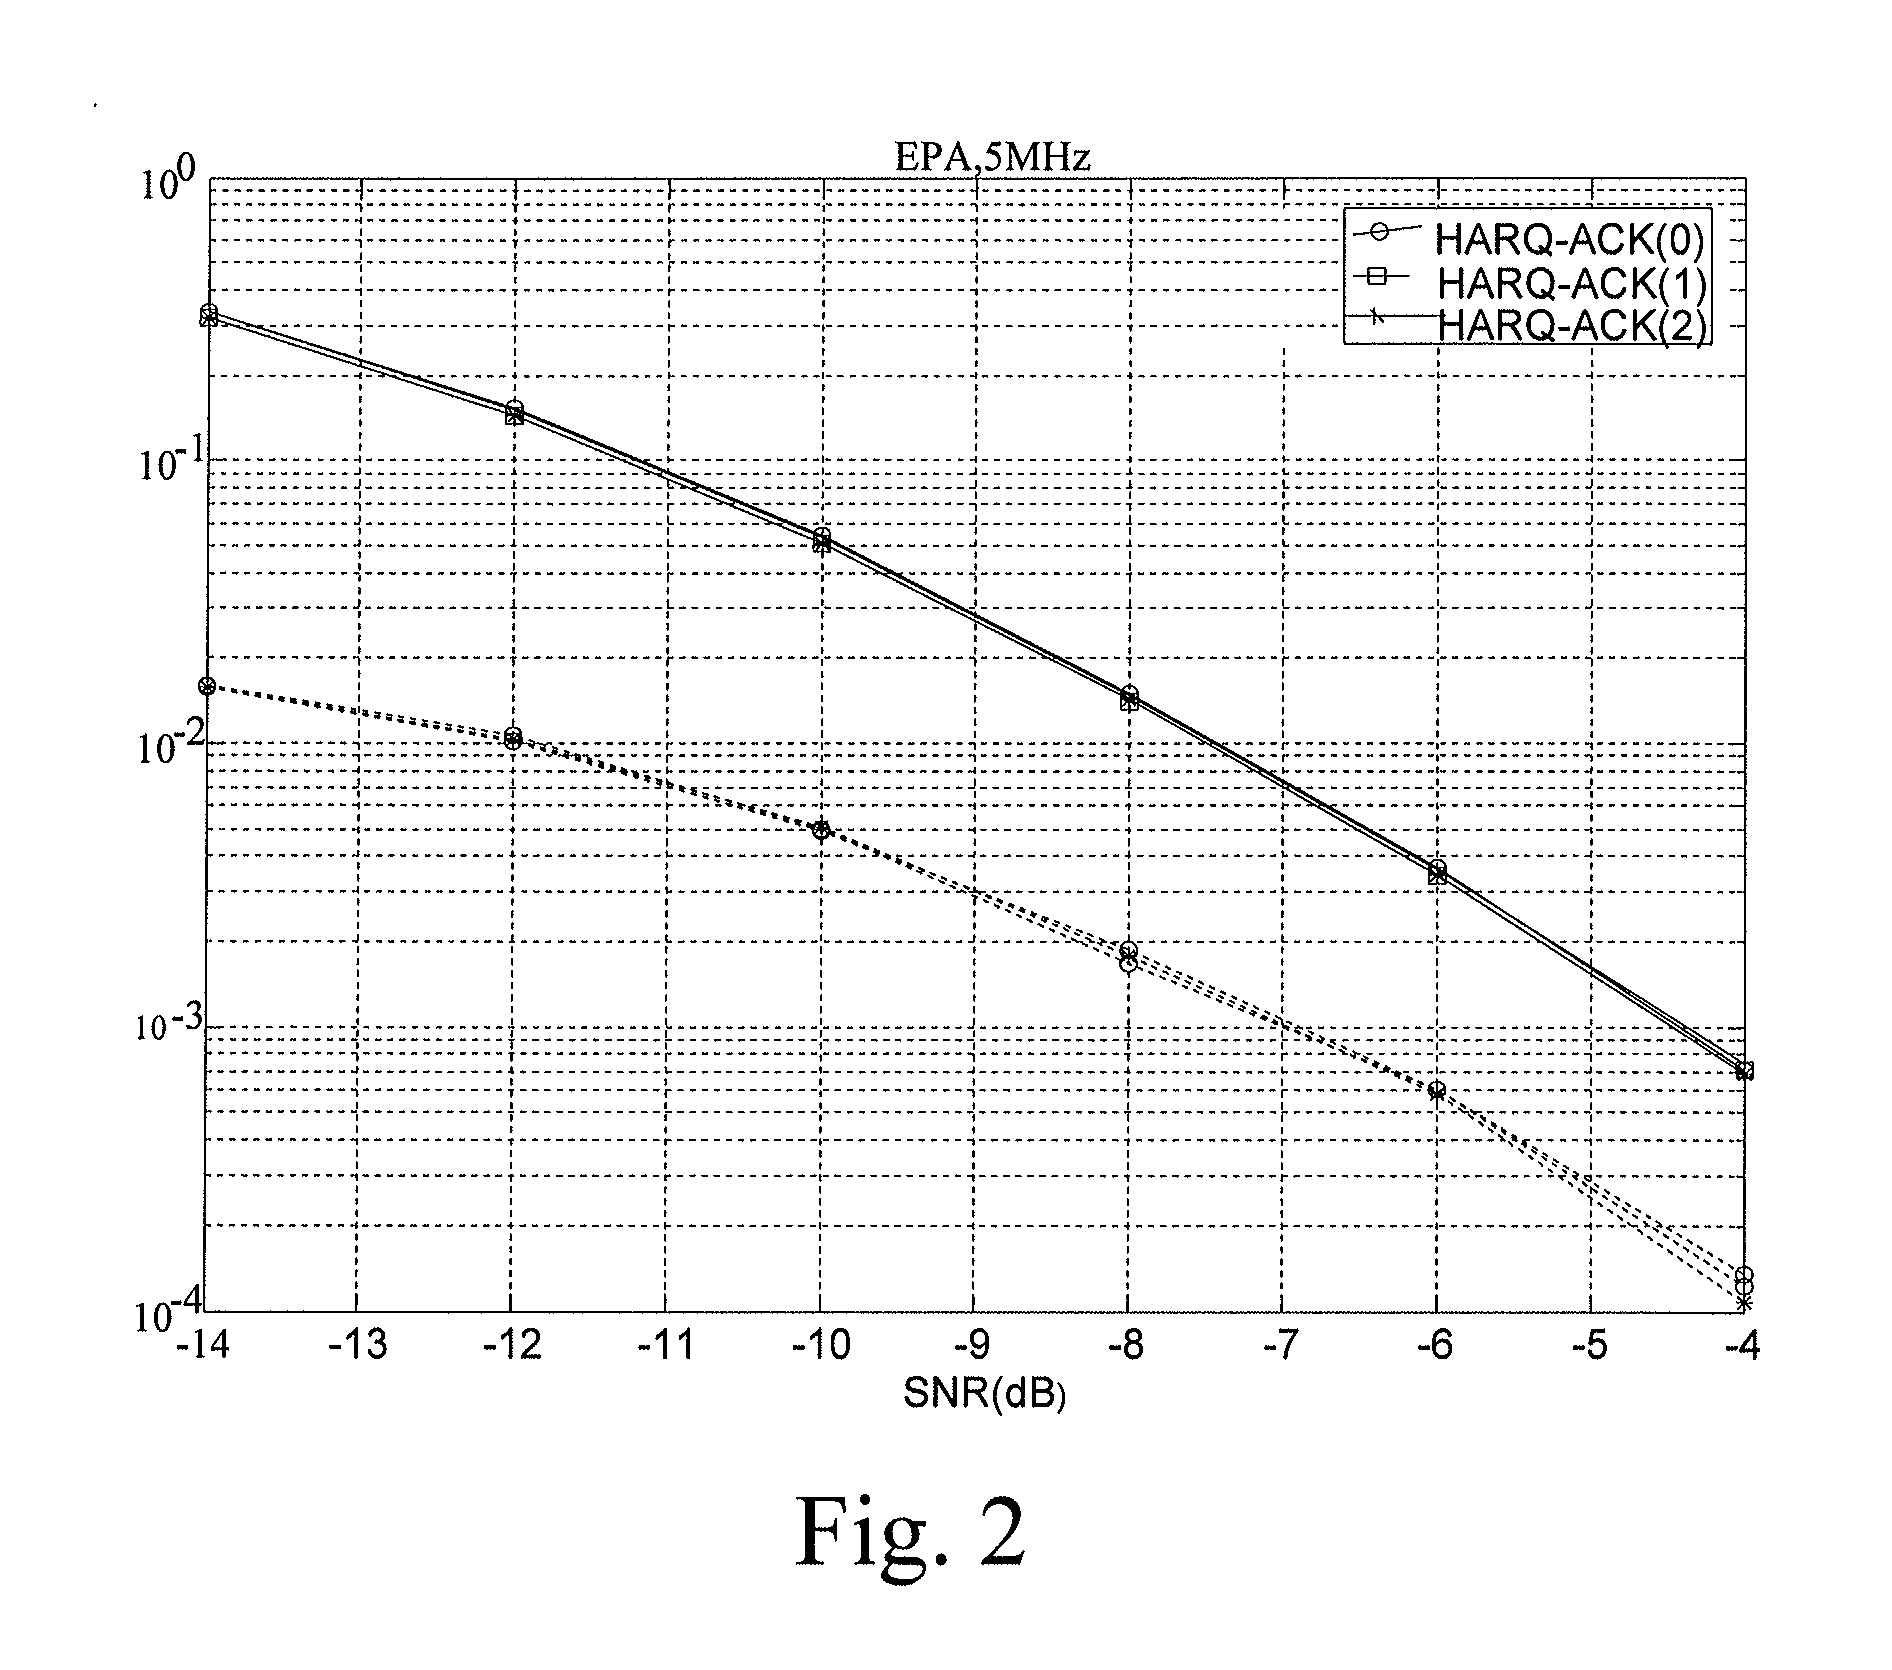 Feedback information relating to a mobile communications system using carrier aggregation